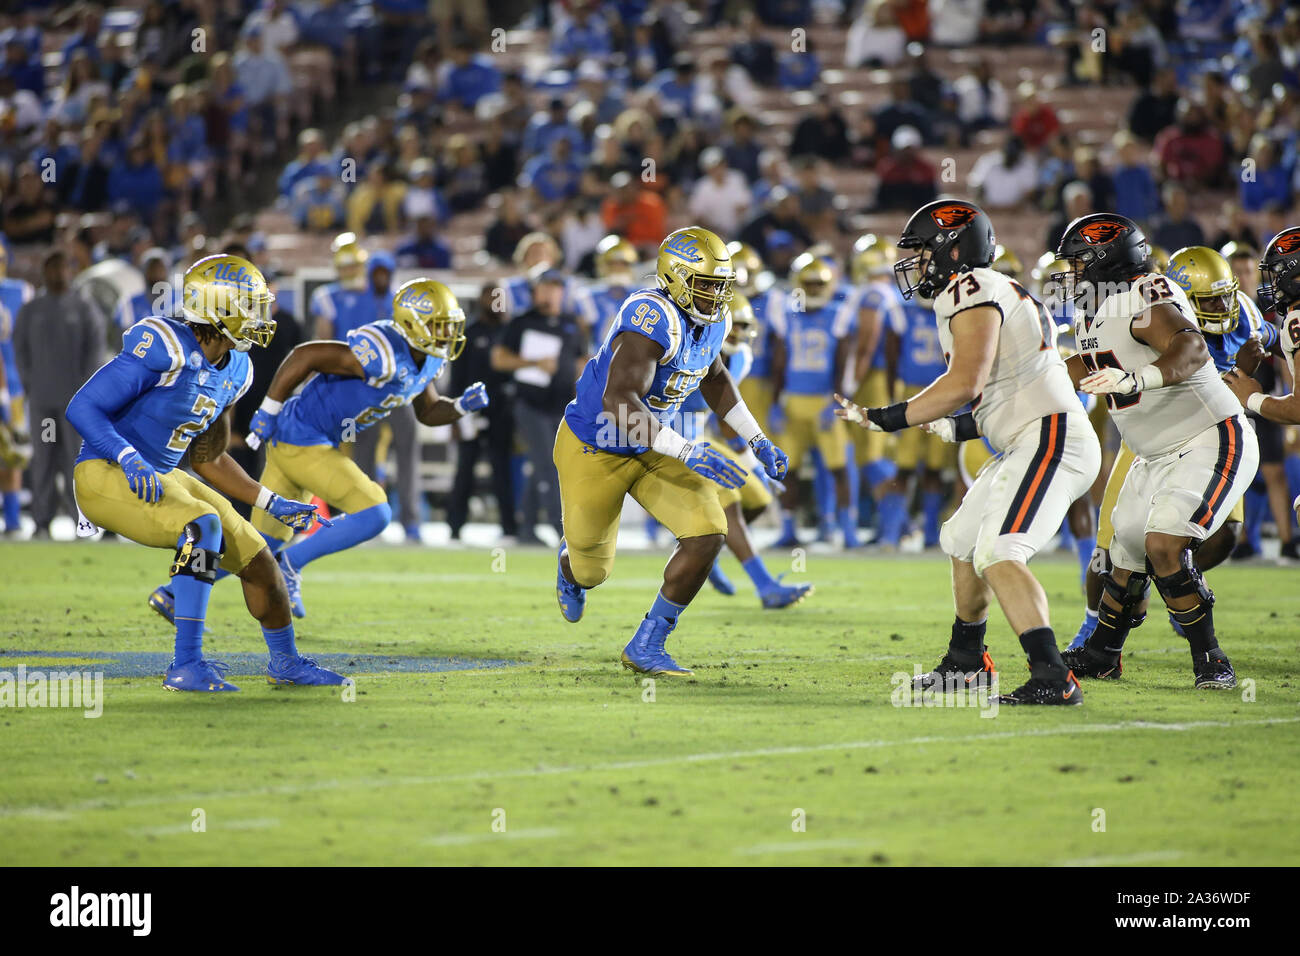 https://c8.alamy.com/comp/2A36WDF/pasadena-ca-05th-oct-2019-ucla-bruins-defensive-lineman-osa-odighizuwa-92-during-the-oregon-state-vs-ucla-bruins-at-the-rose-bowl-in-pasadena-ca-on-october-05-2019-photo-by-jevone-moore-credit-csmalamy-live-news-2A36WDF.jpg